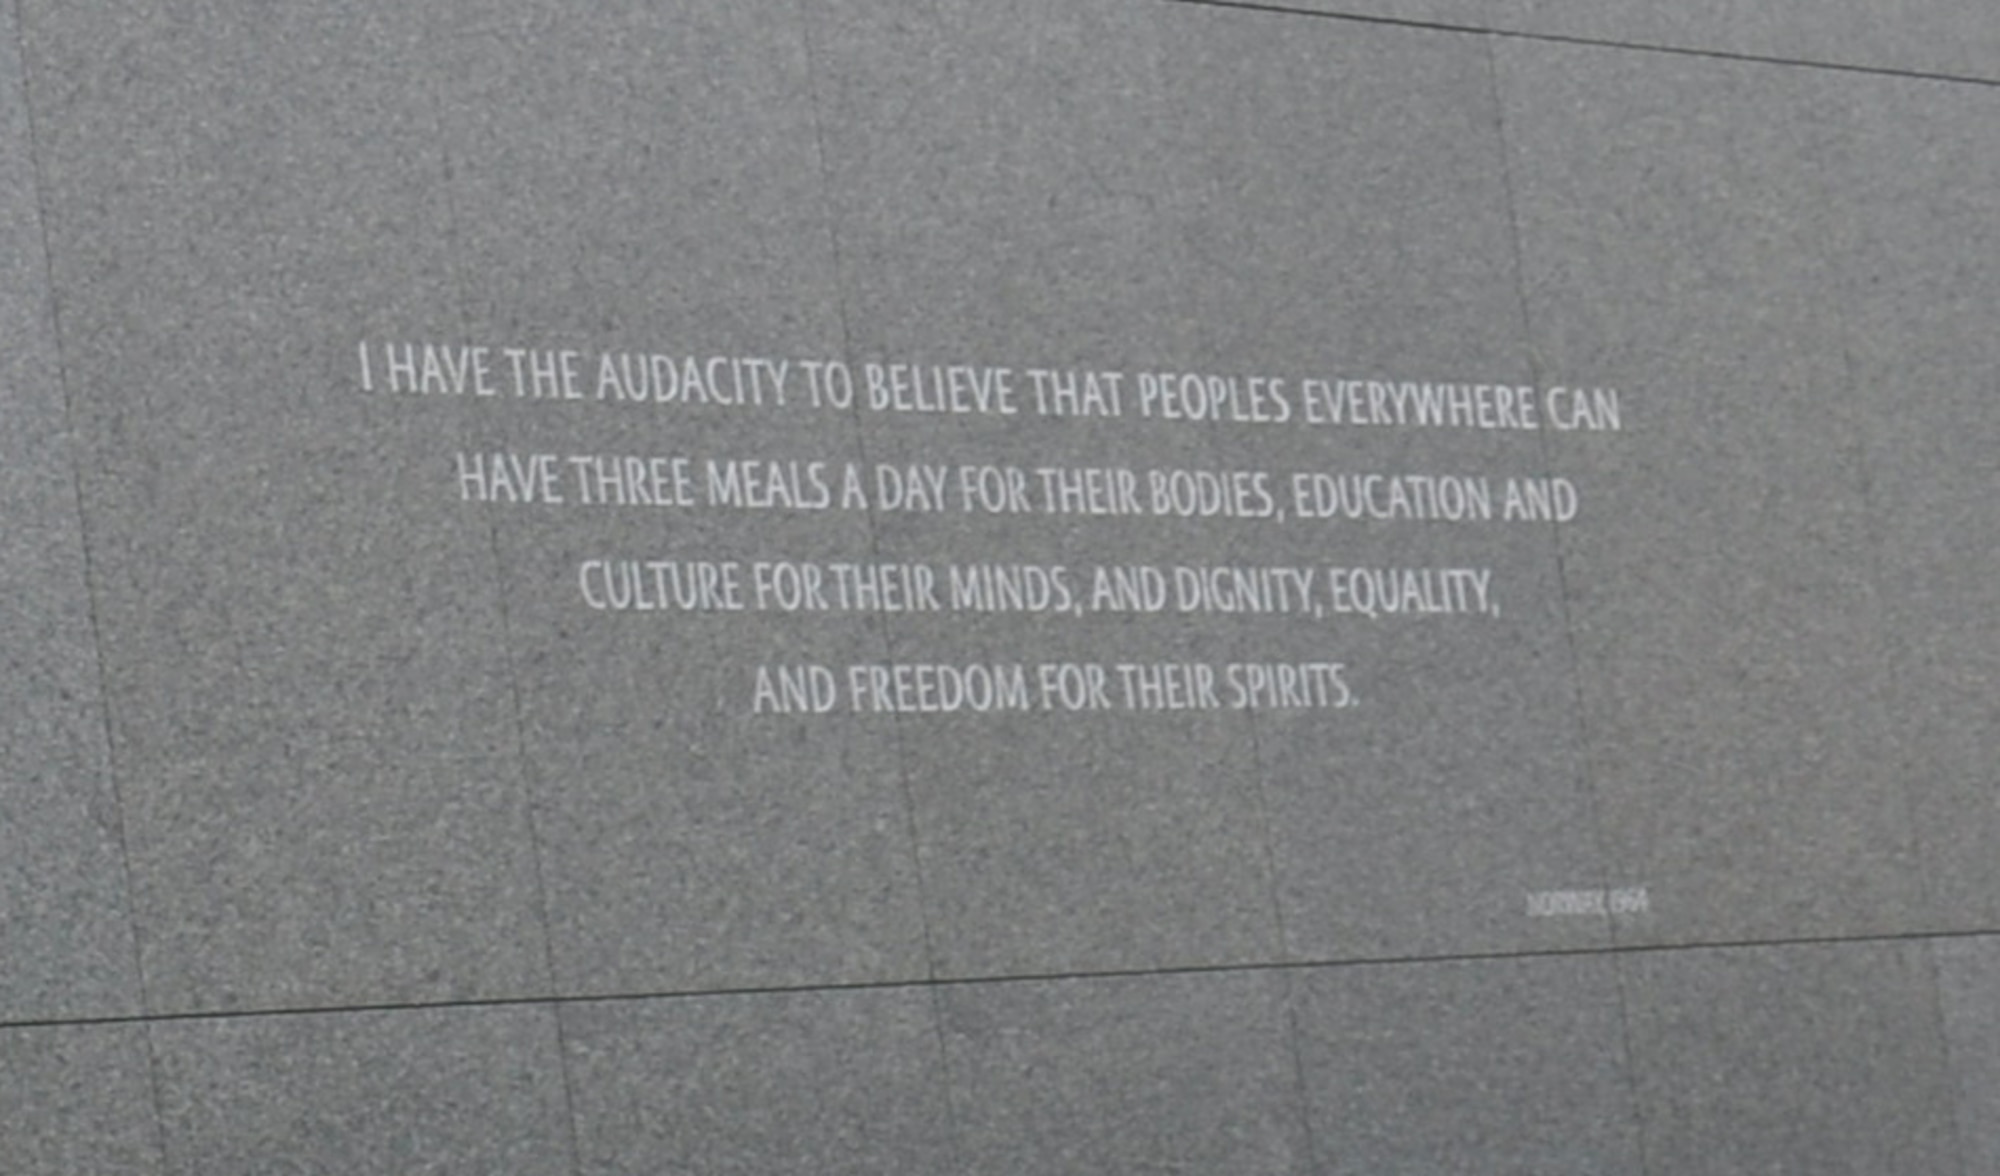 A wall inscribed with a quote from Dr. Martin Luther King stands in West Potomac Park next to the National Mall, Washington D.C. The quote is from Dr. King’s acceptance speech in Oslo, Norway, in 1964. (U.S. Air Force photo by L. Cunningham)